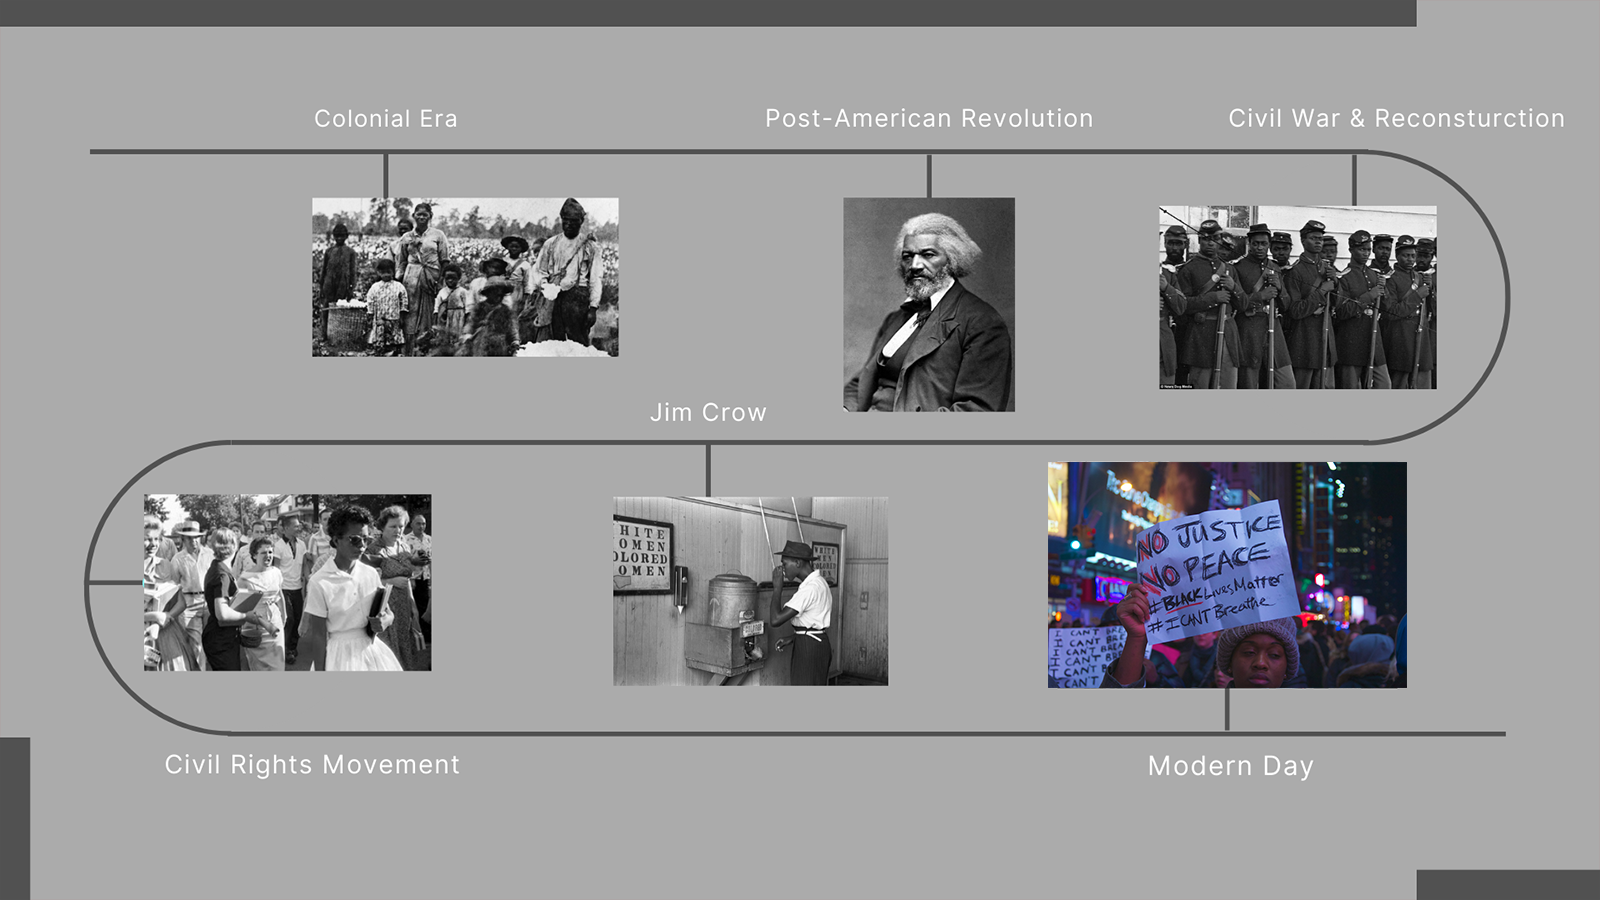 Key Events During the Civil Rights Movement